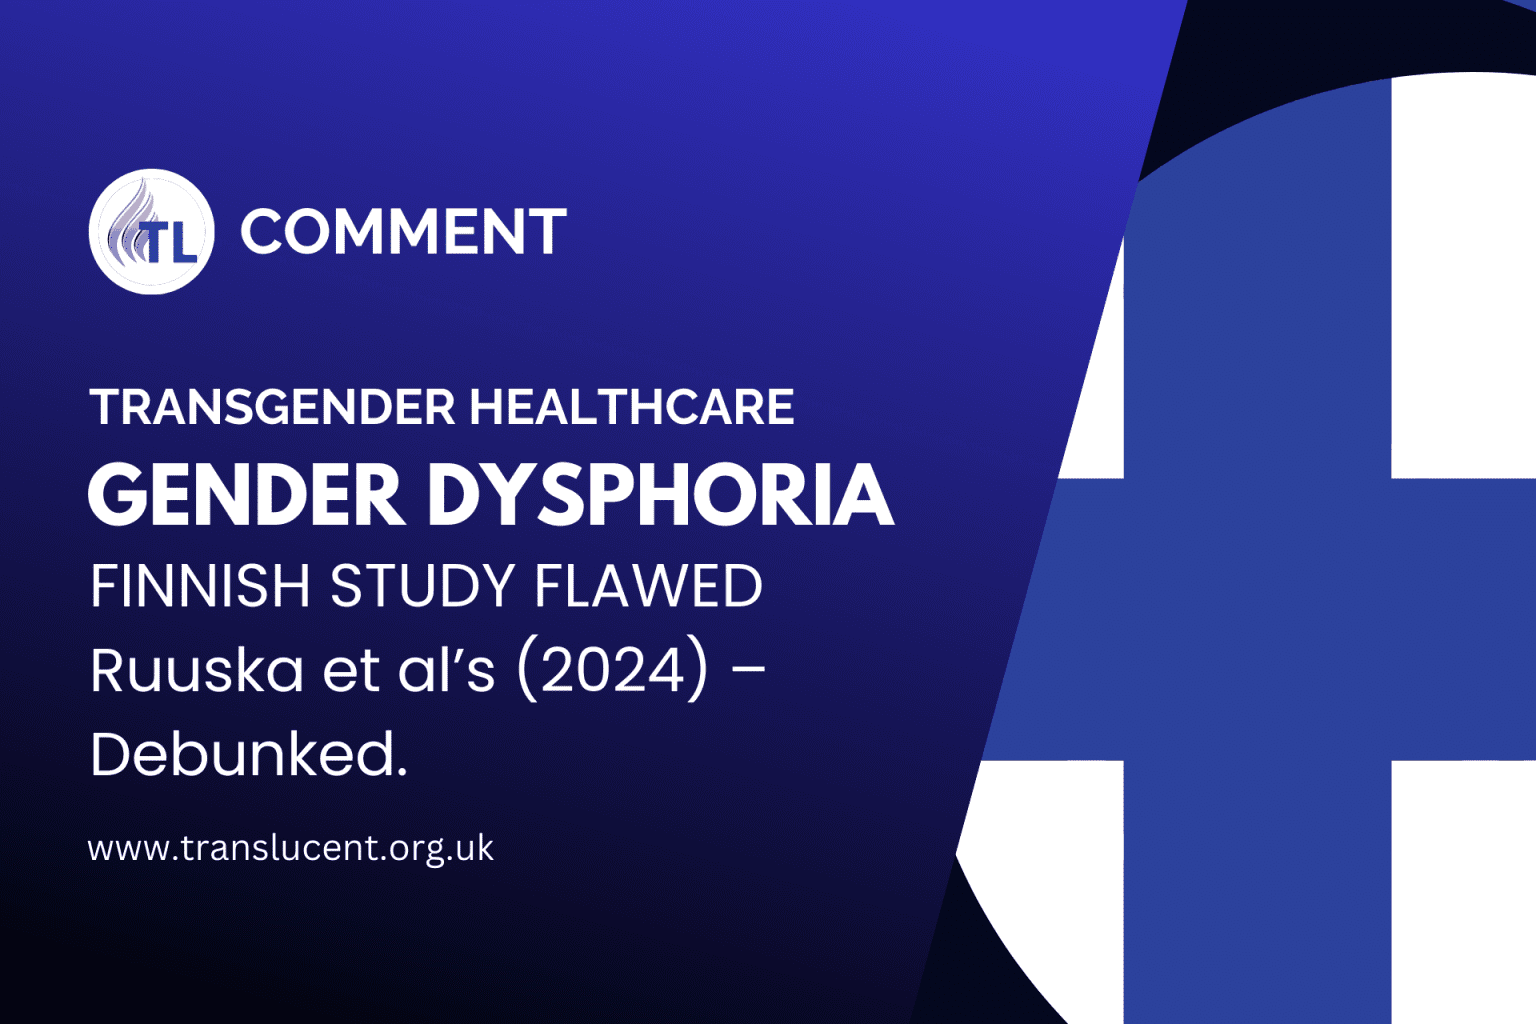 Ruuska-et-als-2024–Debunked_Gender dysphoria is not like sunshine: Finnish analysis of suicide risk is seriously flawed